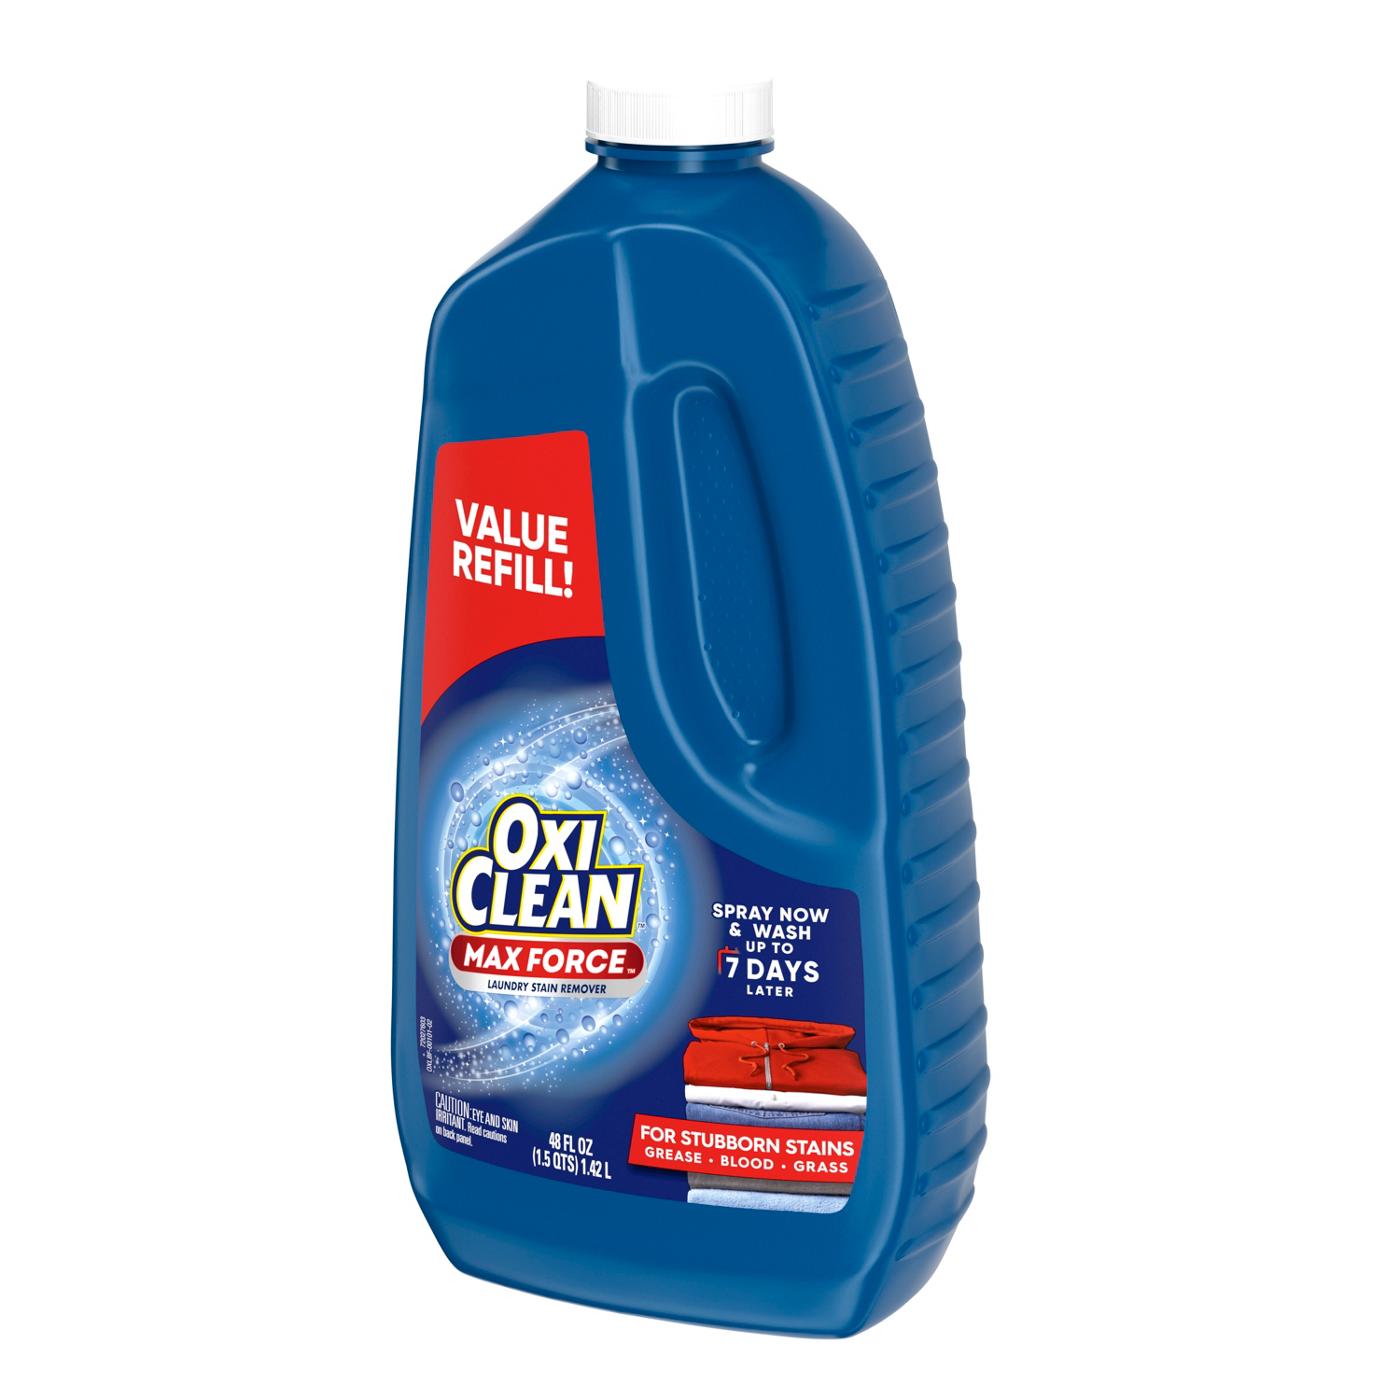 OxiClean Max Force Laundry Stain Remover Refill; image 3 of 4